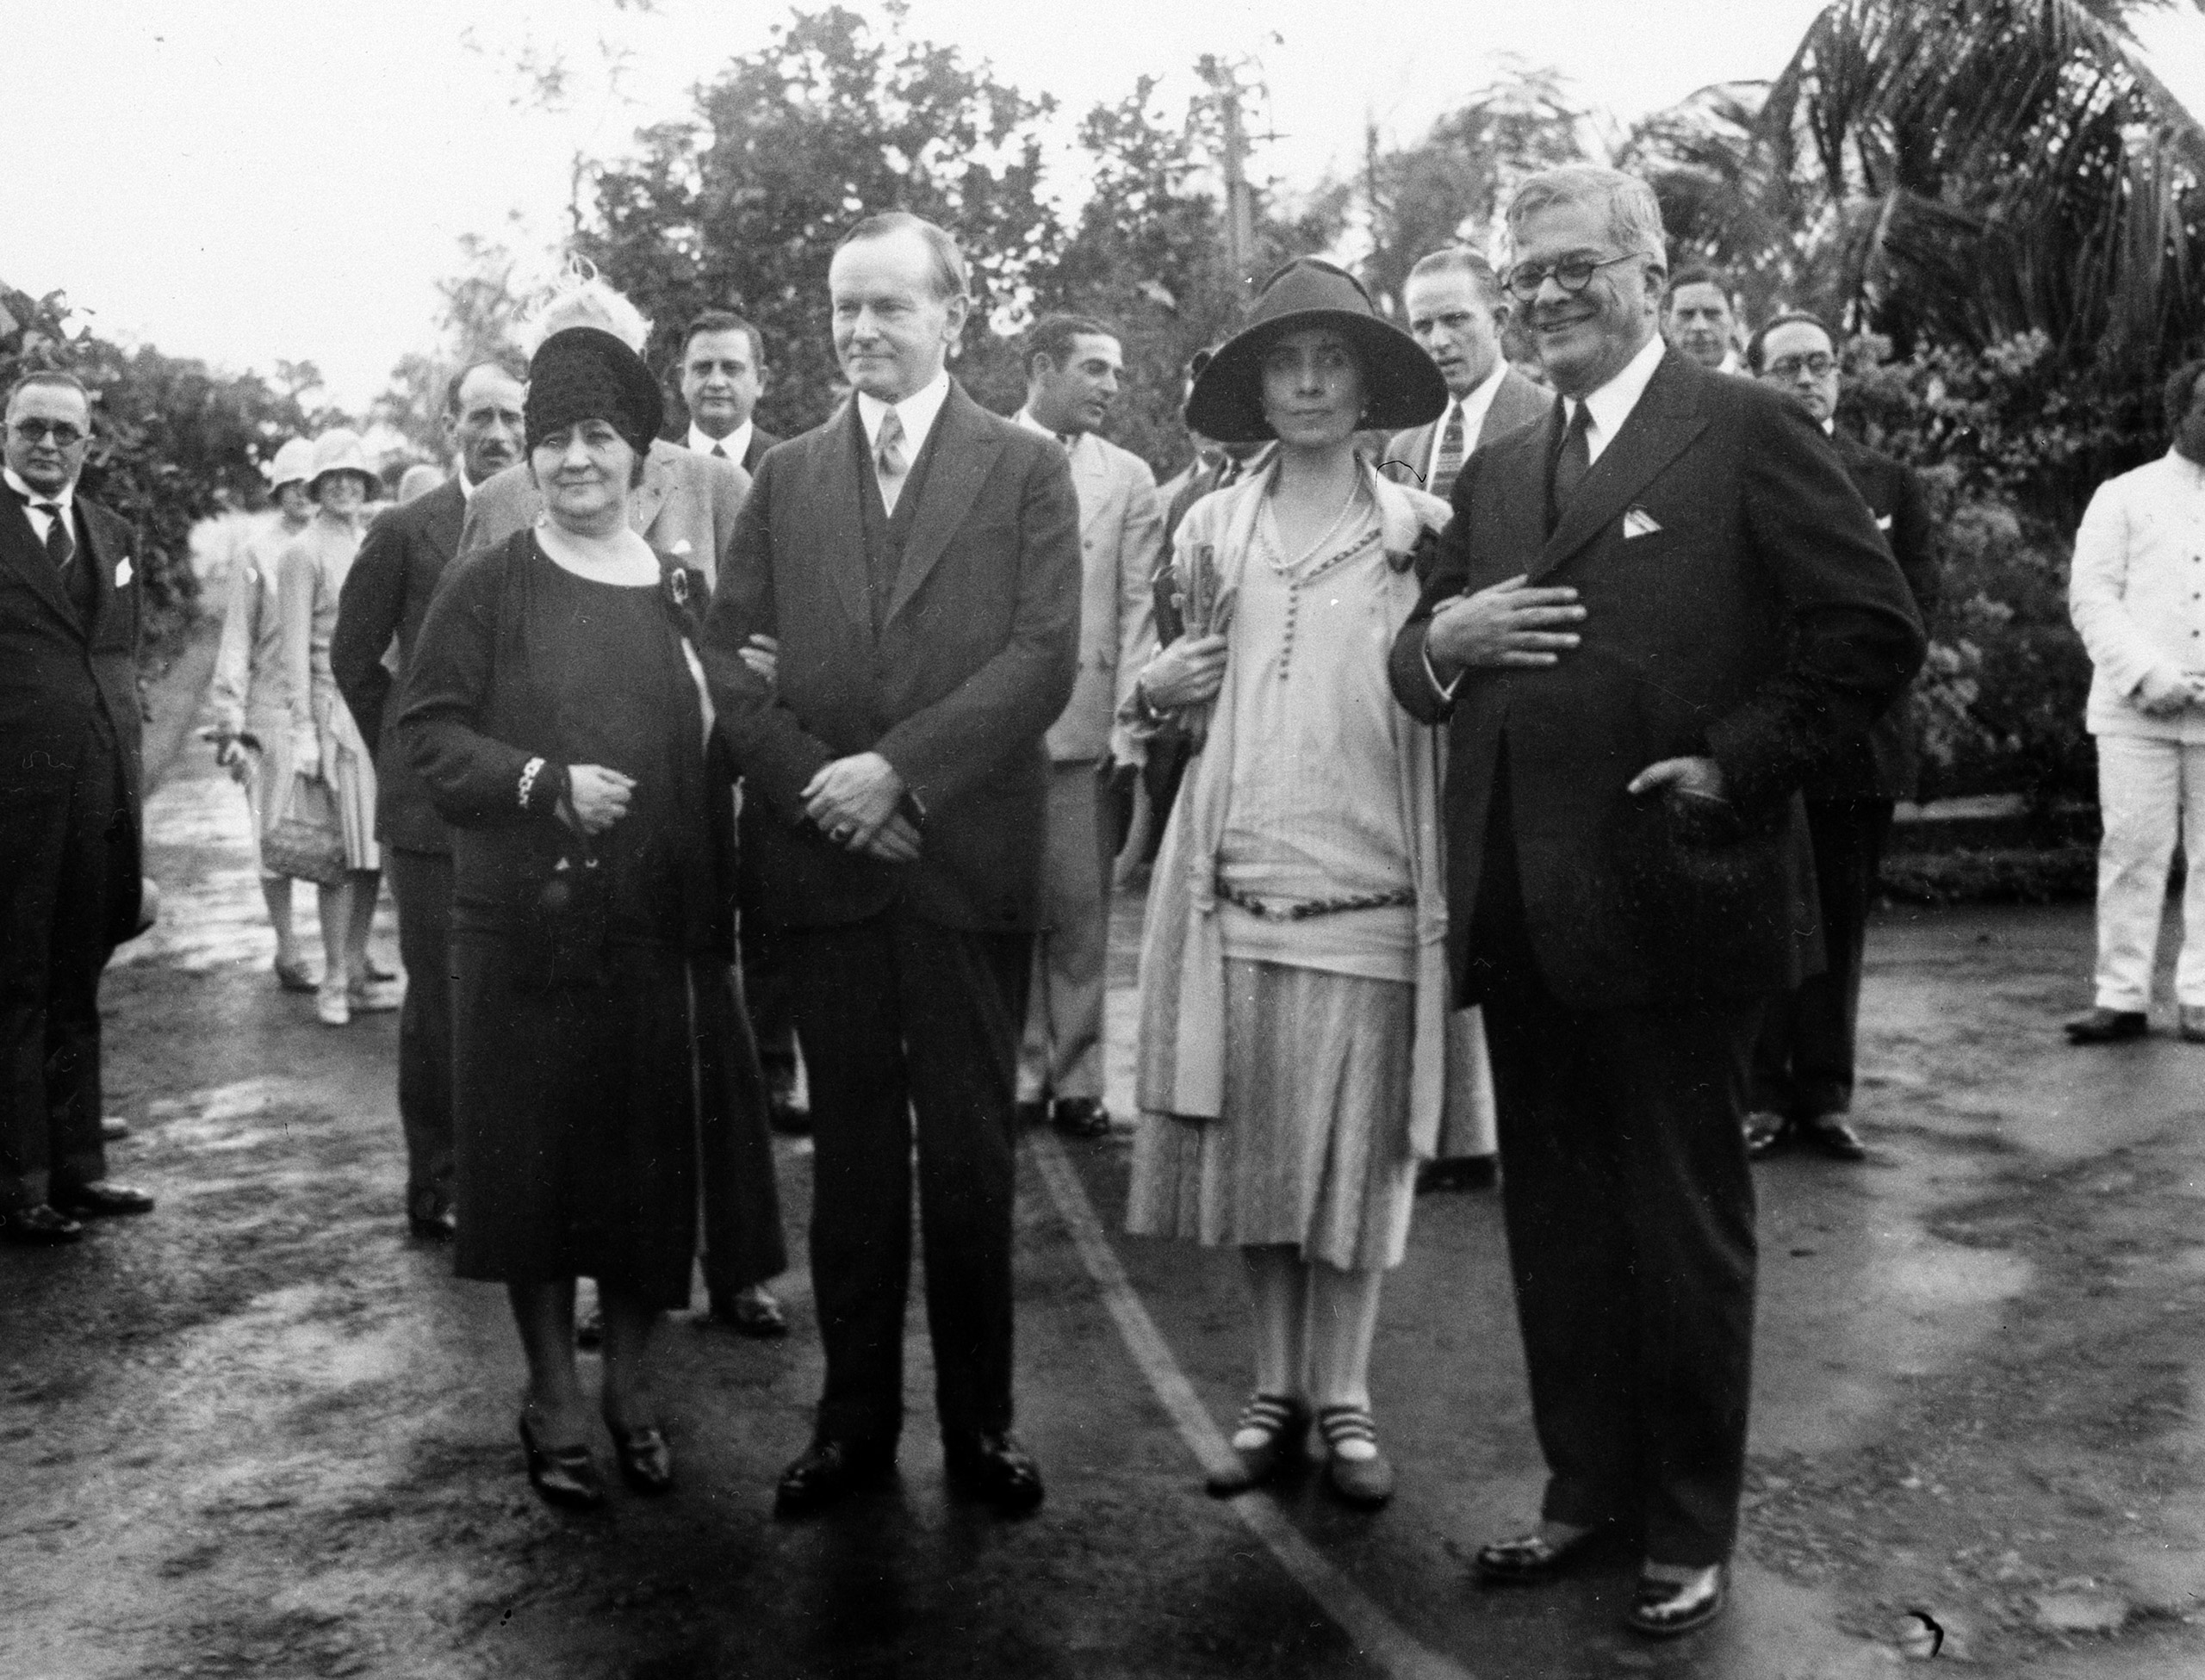 U.S. President Calvin Coolidge, second from left, and his wife, first lady Grace Coolidge, third from left, are shown with the President of Cuba General Gerardo Machado y Morales, right, and his wife, Elvira Machado, left, on the estate of President Machado in Havana, Cuba, Jan. 19, 1928. (AP Photo)